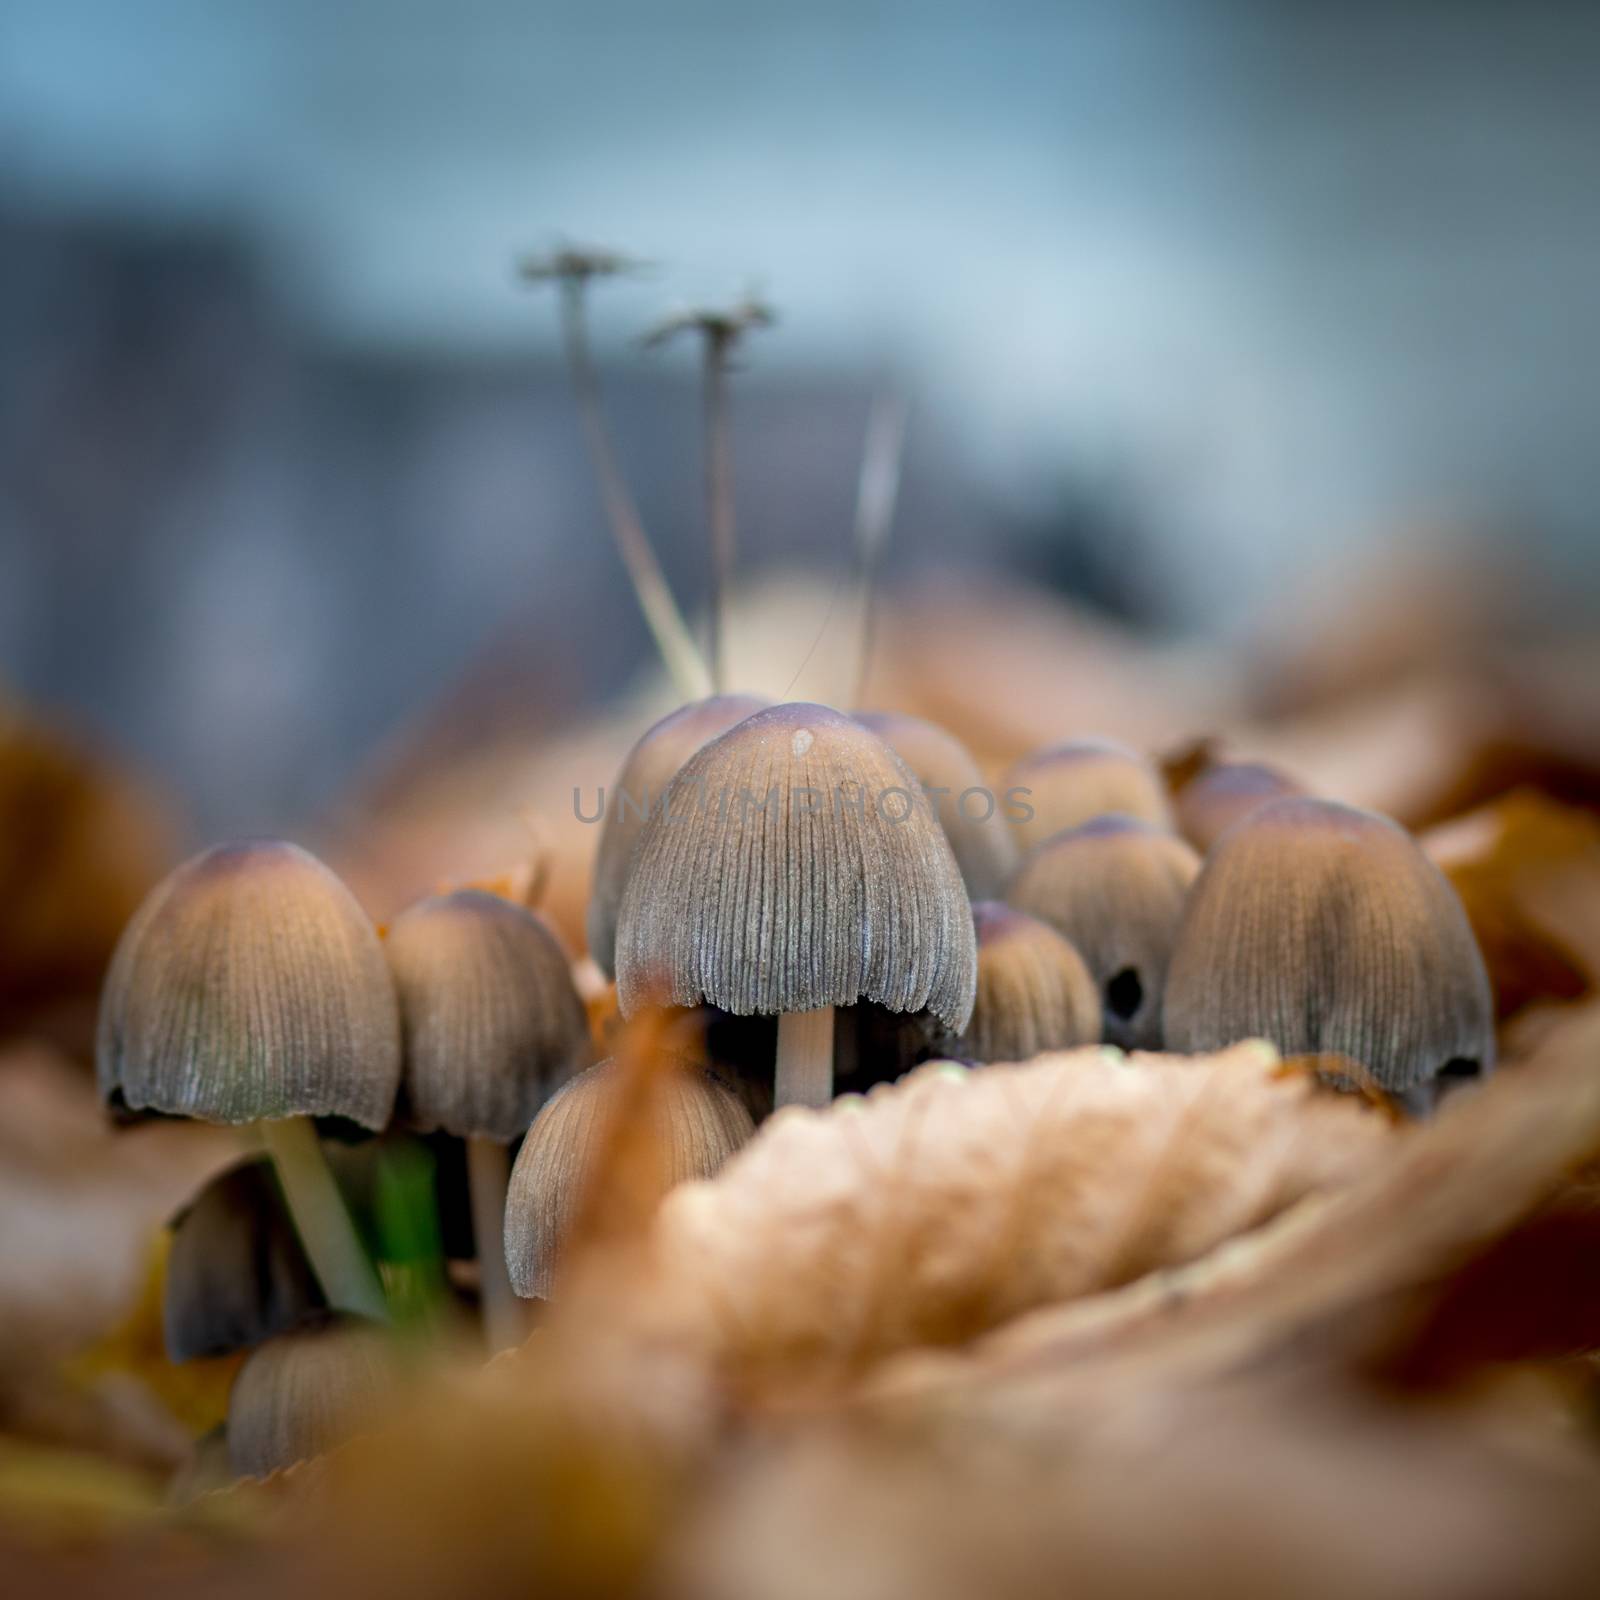 Mushrooms growing in the grass. Poisonous mushrooms. by Yurii73